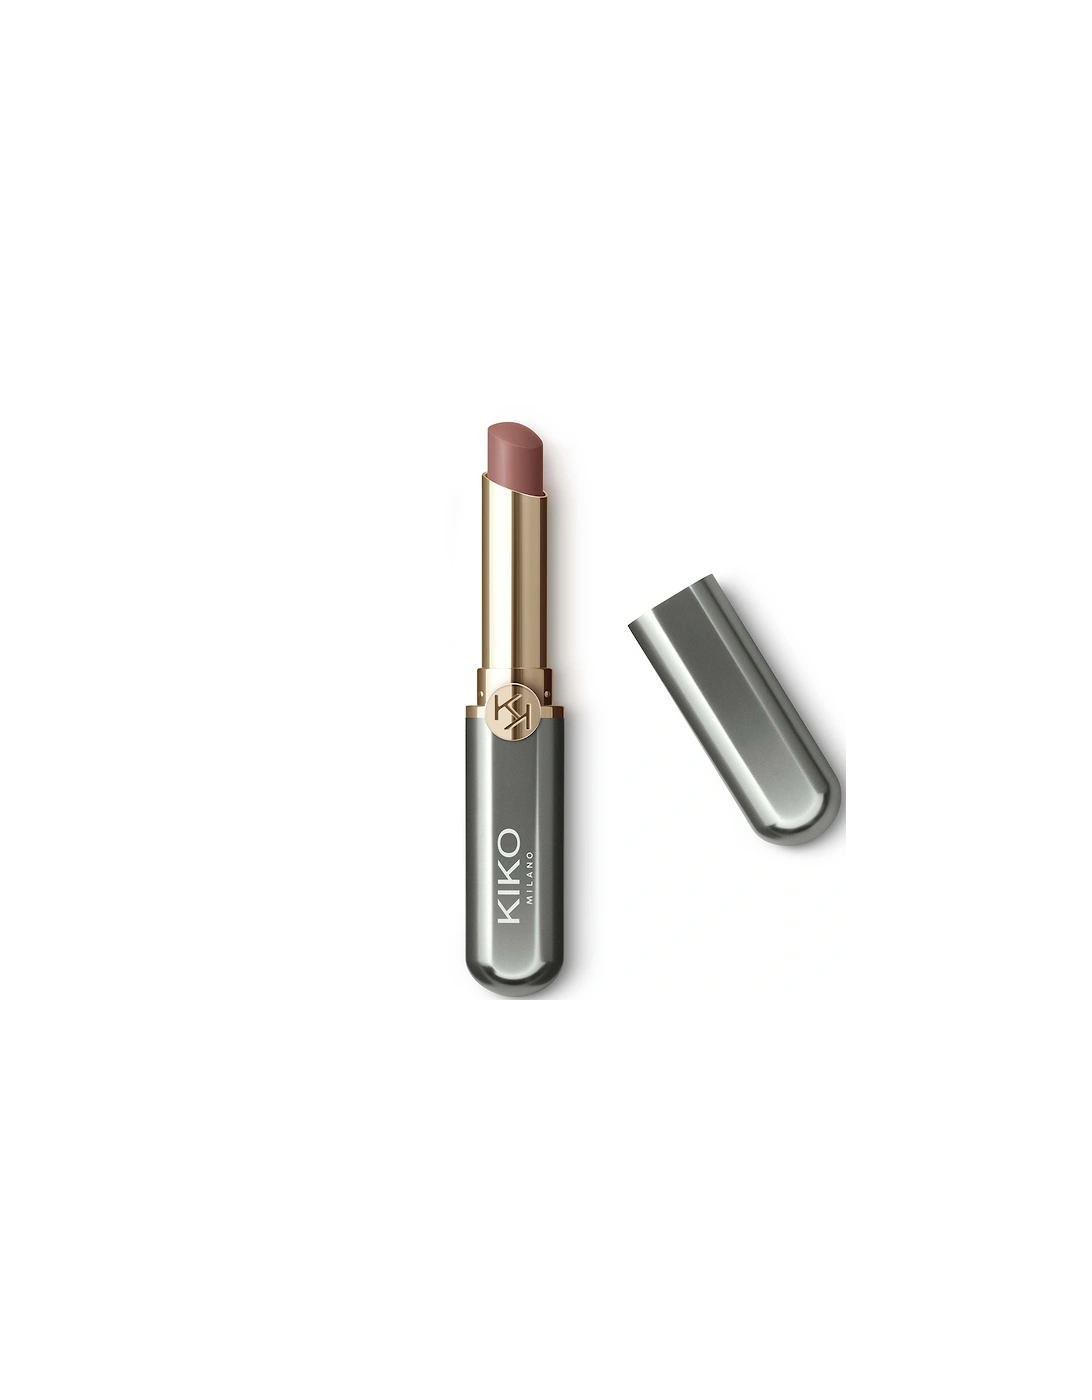 Unlimited Stylo - 07 Taupe Brown, 2 of 1